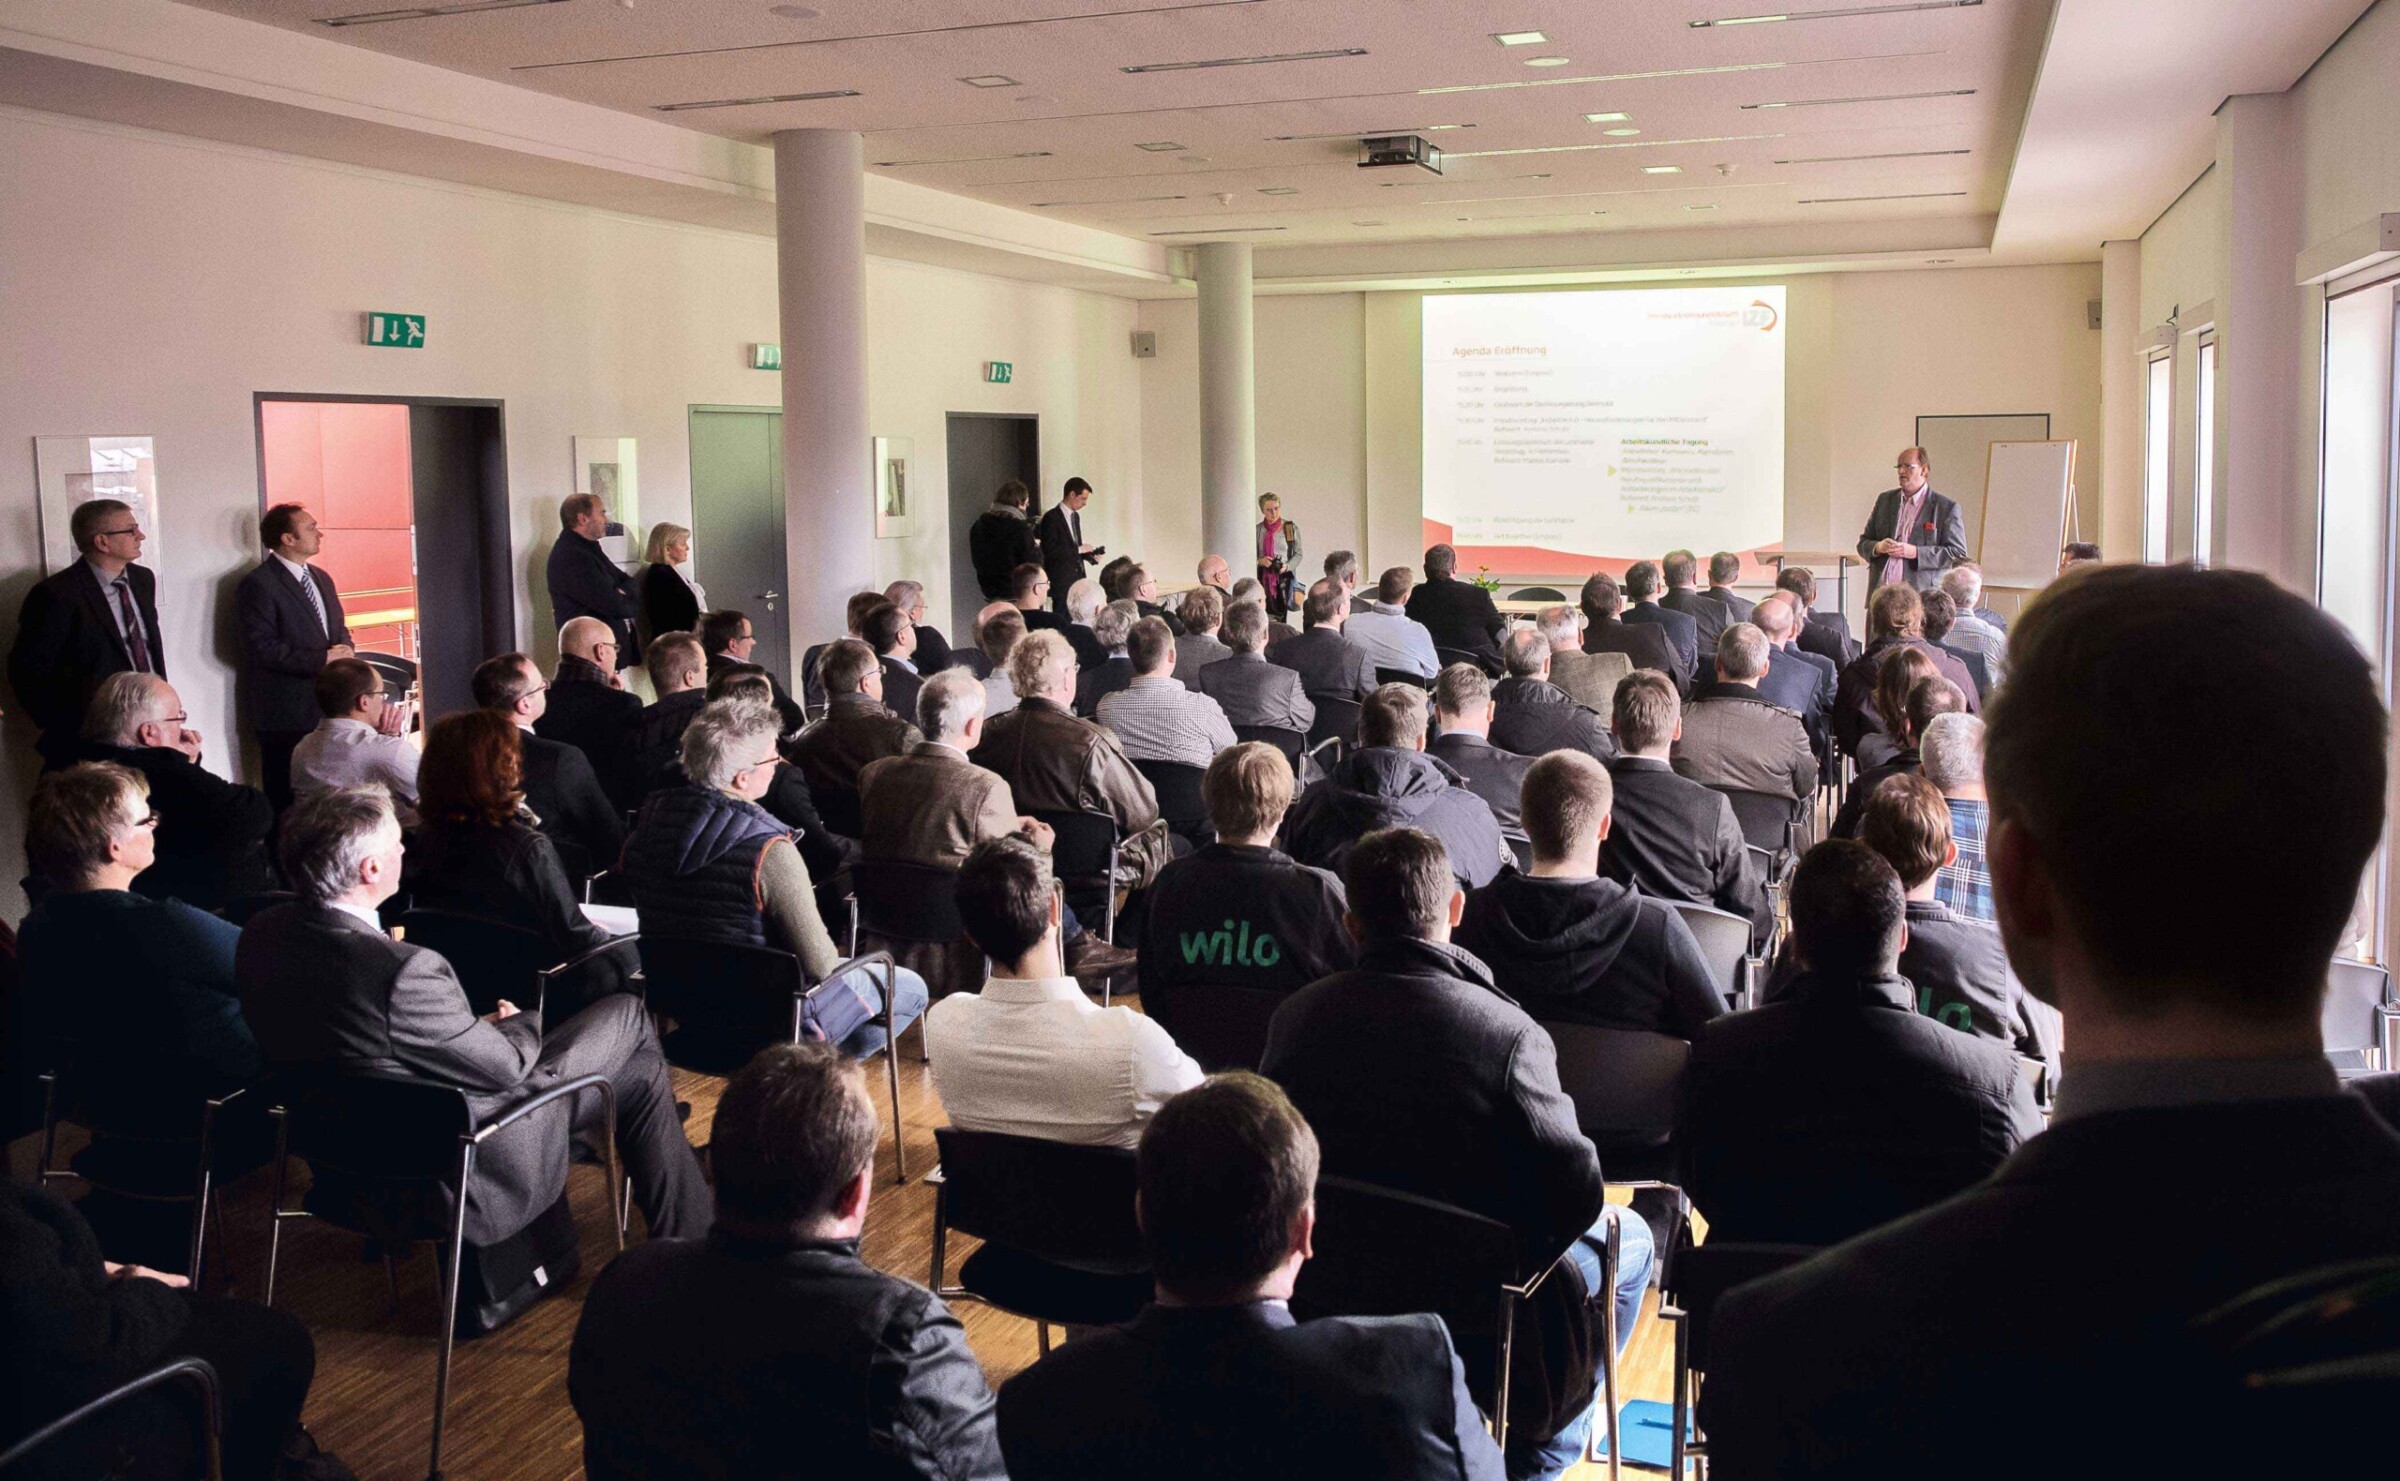 125 guests came to Bad Oeynhausen for the official opening of the new Teaching Factory on 28 January.